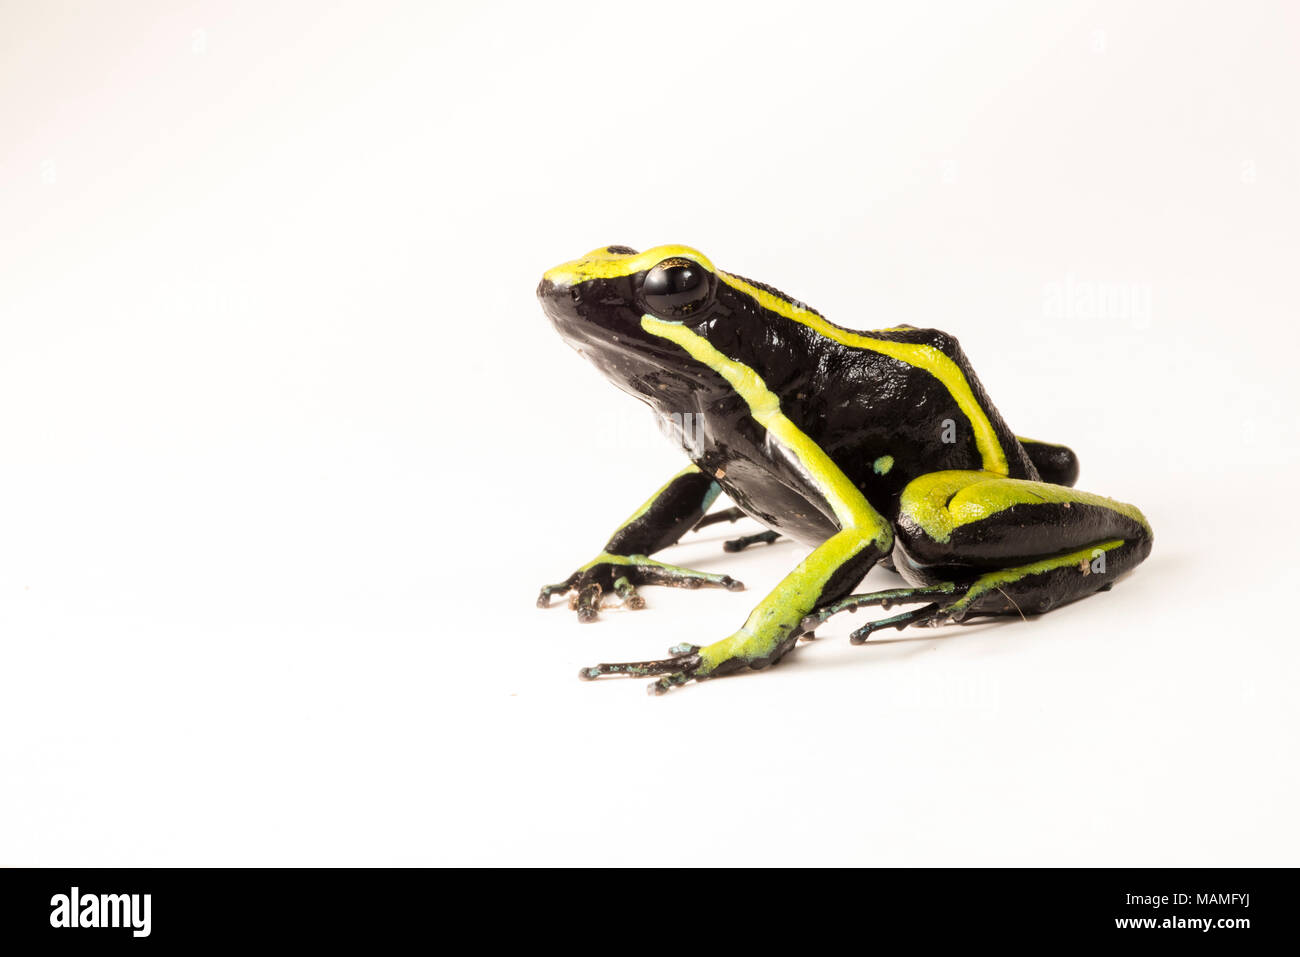 A three striped poison frog (Ameerega trivittata) isolated on white. This poison frog relies on potent toxins to defend it from predators. Stock Photo